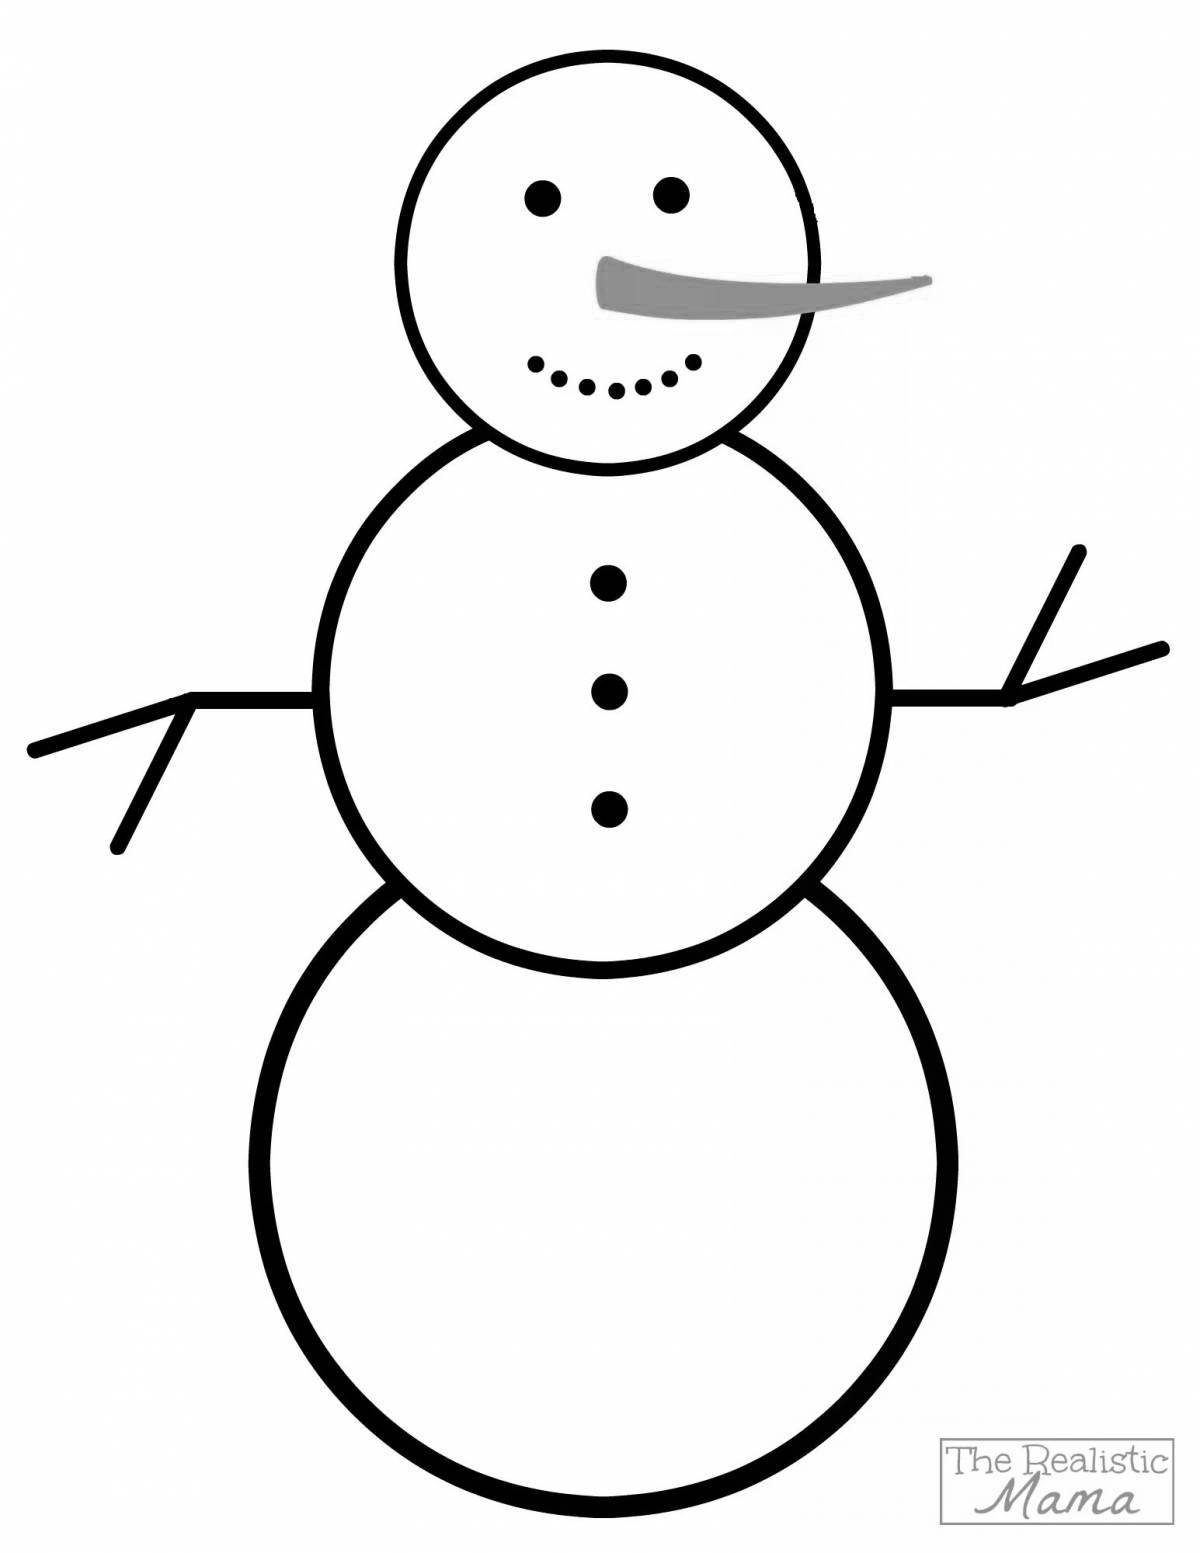 Fancy coloring snowman without a nose